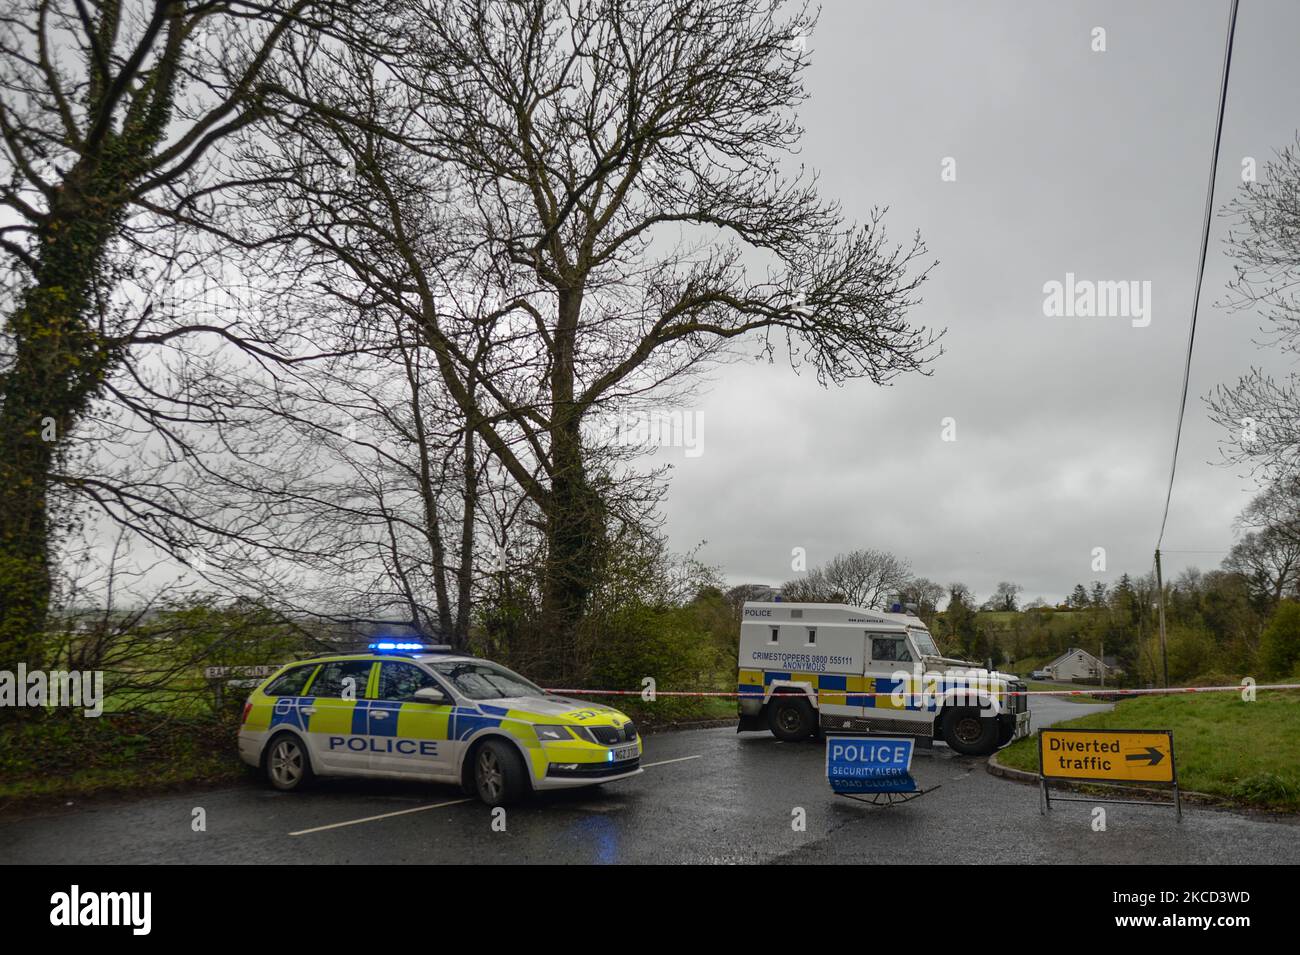 PSNI vehicles block the road during a security alert on Ballyquin Road on Monday after a viable explosive device was found near the house in a rural area near Dungiven. On Tuesday, April 20, 2021, in Dungiven, Co Londonderry. Northern Ireland. (Photo by Artur Widak/NurPhoto) Stock Photo